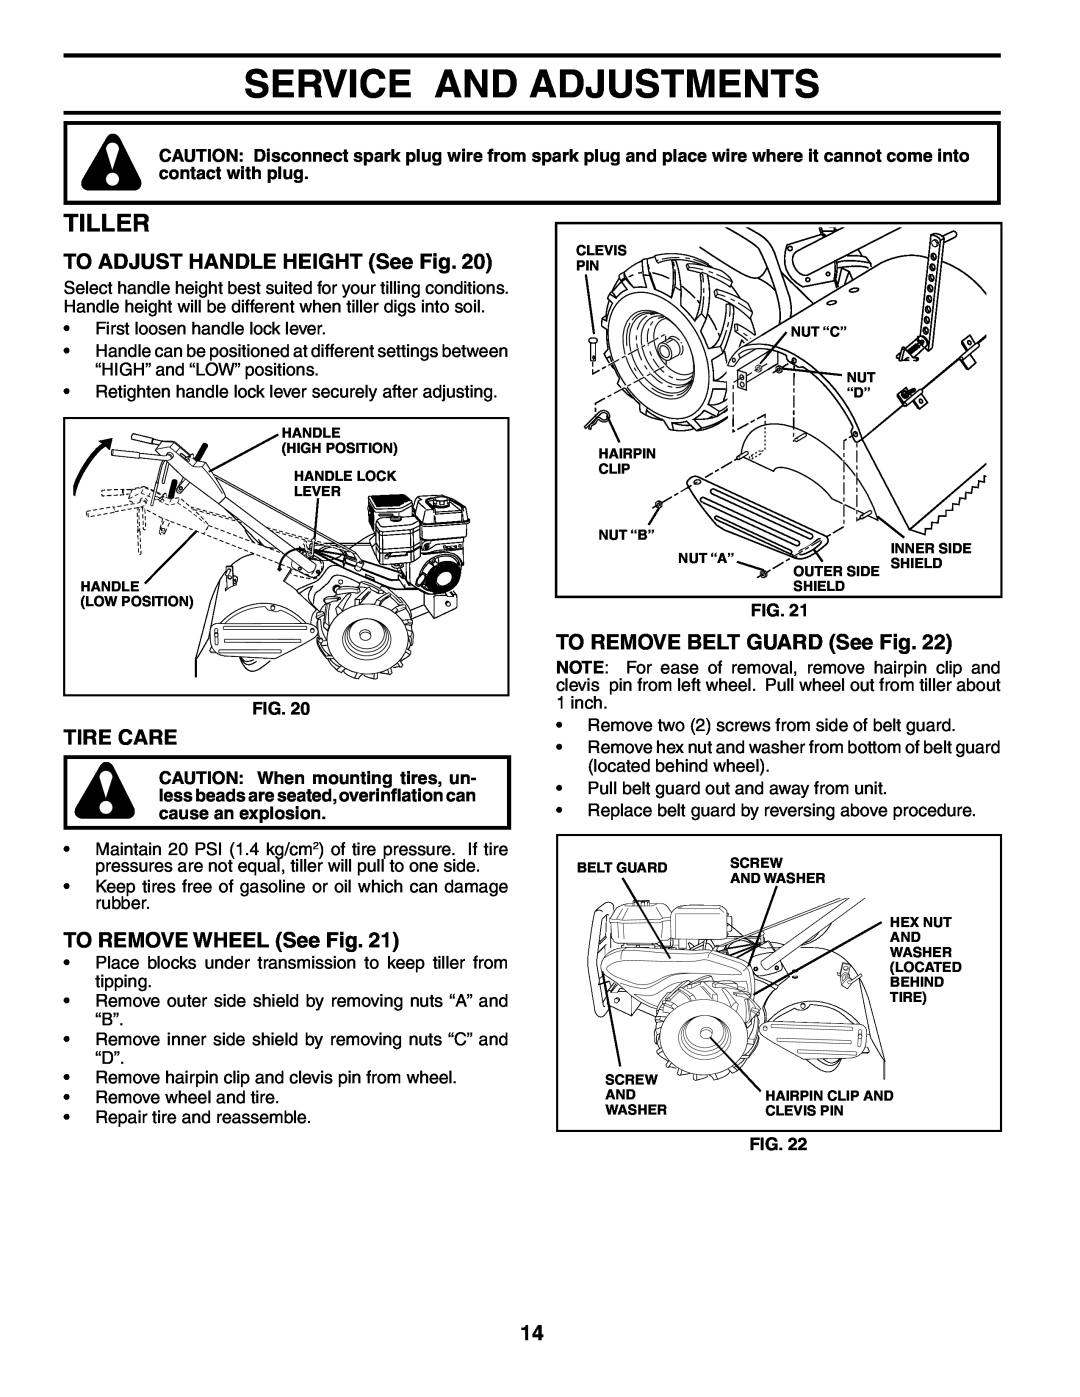 Poulan PRRT65C Service And Adjustments, Tiller, TO ADJUST HANDLE HEIGHT See Fig, Tire Care, TO REMOVE WHEEL See Fig 